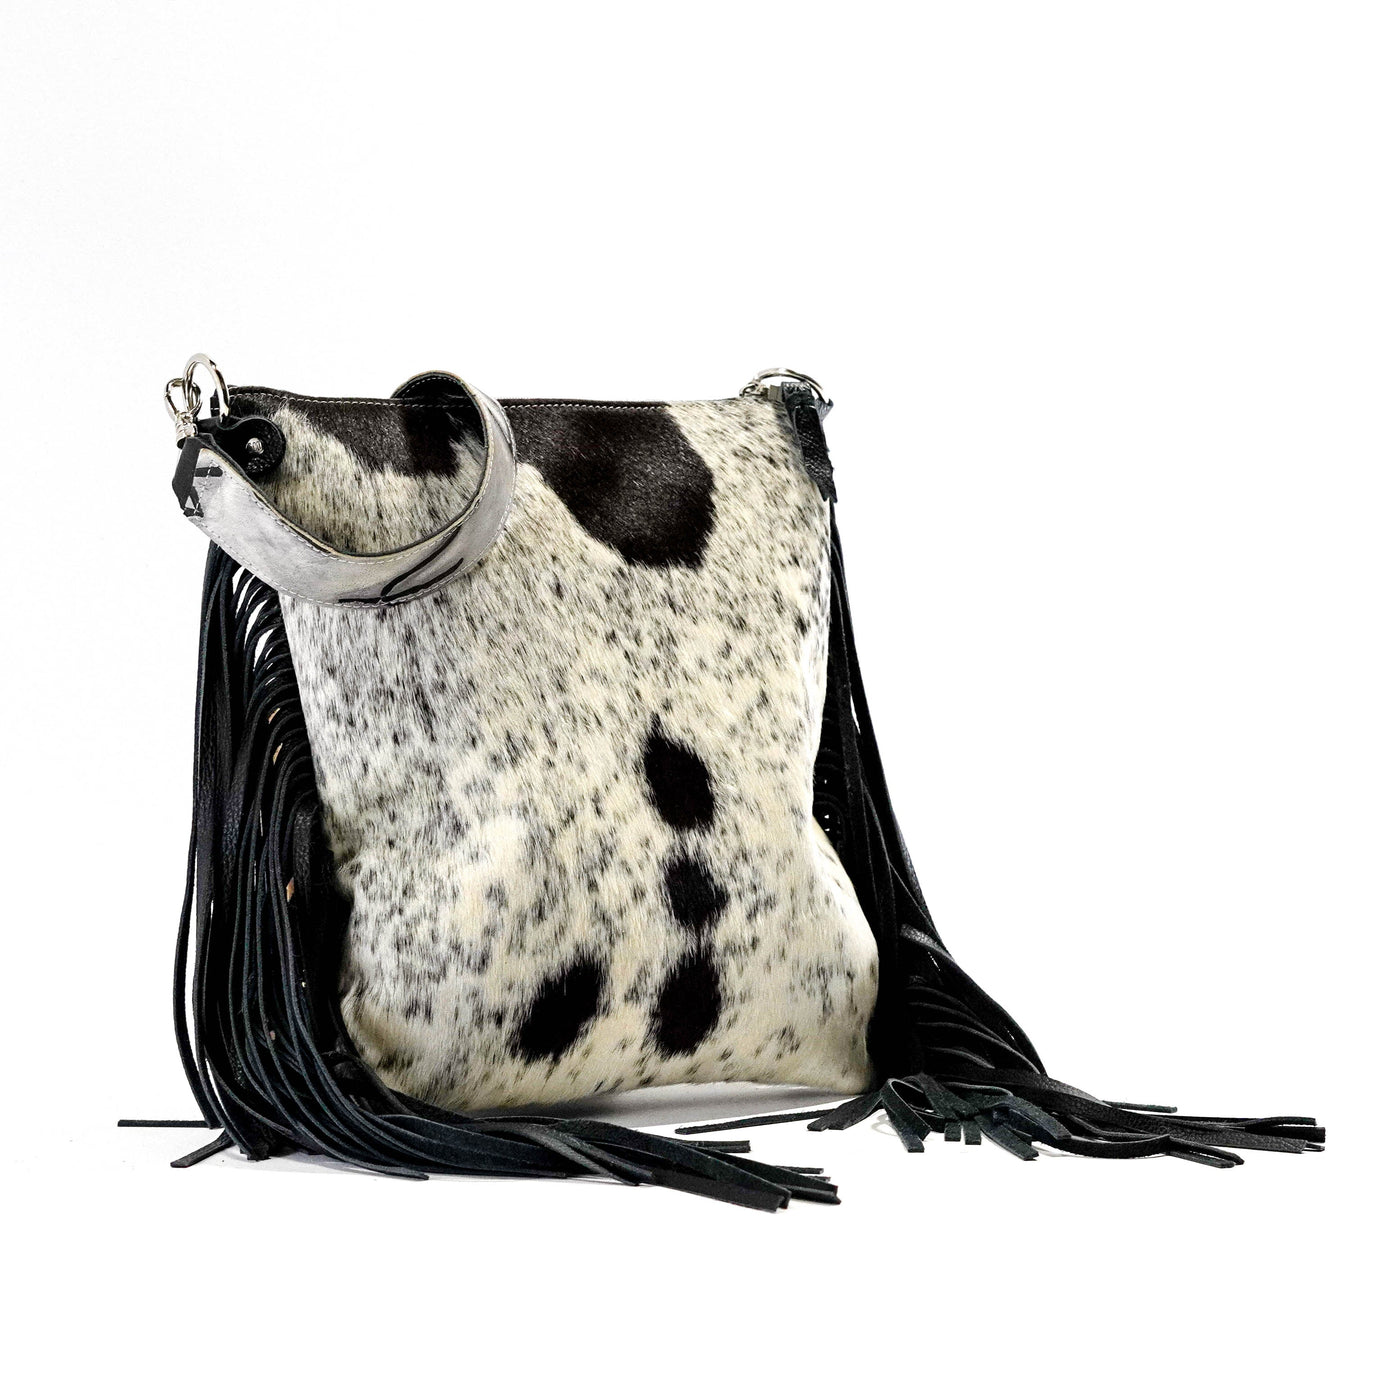 Wynonna - Black & White w/ Black Leather-Wynonna-Western-Cowhide-Bags-Handmade-Products-Gifts-Dancing Cactus Designs